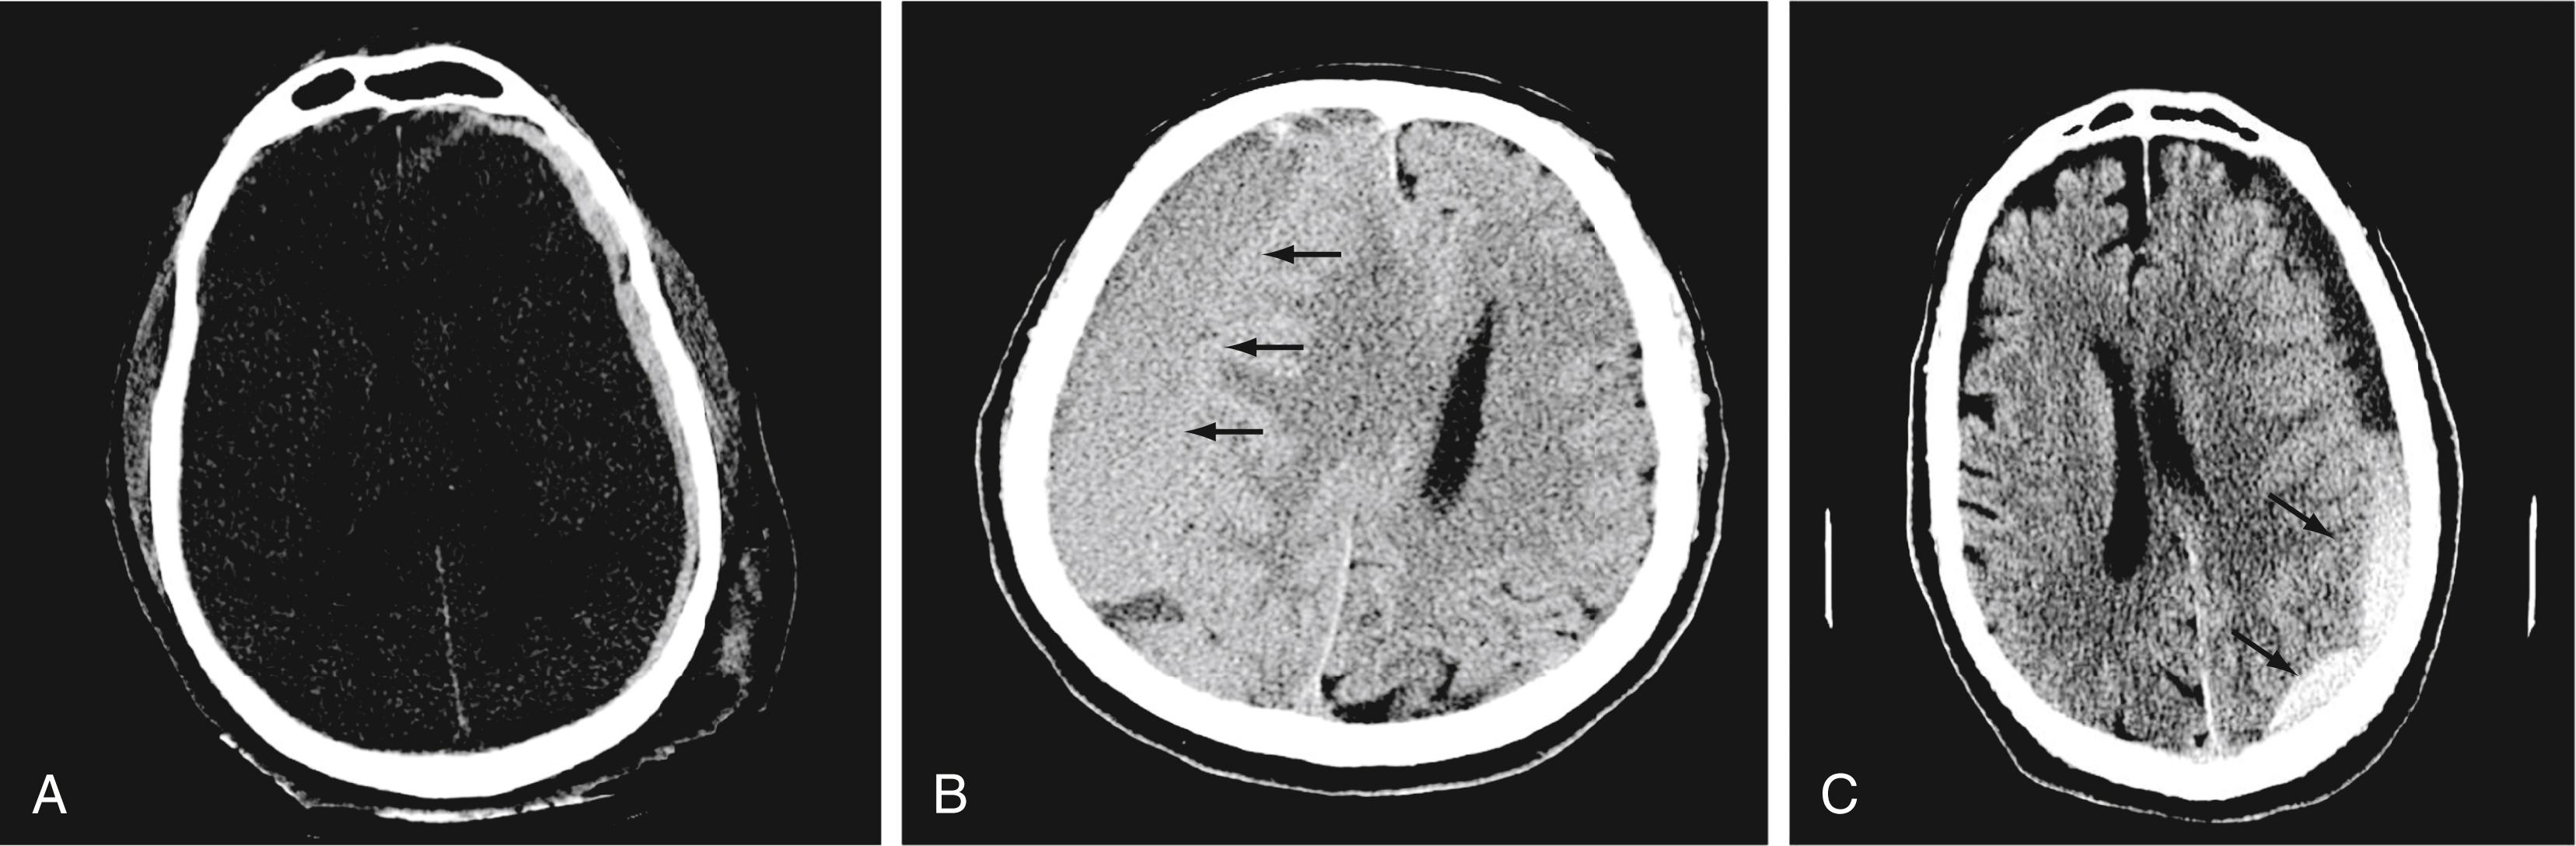 Figure 10.2, (A) Non–contrast-enhanced computed tomographic image of the head, showing a thin left acute subdural hematoma (SDH). (B) Right subacute, nearly isodense SDH (arrows). (C) Acute-on-chronic SDH over the left frontal and parietal lobes (arrows).